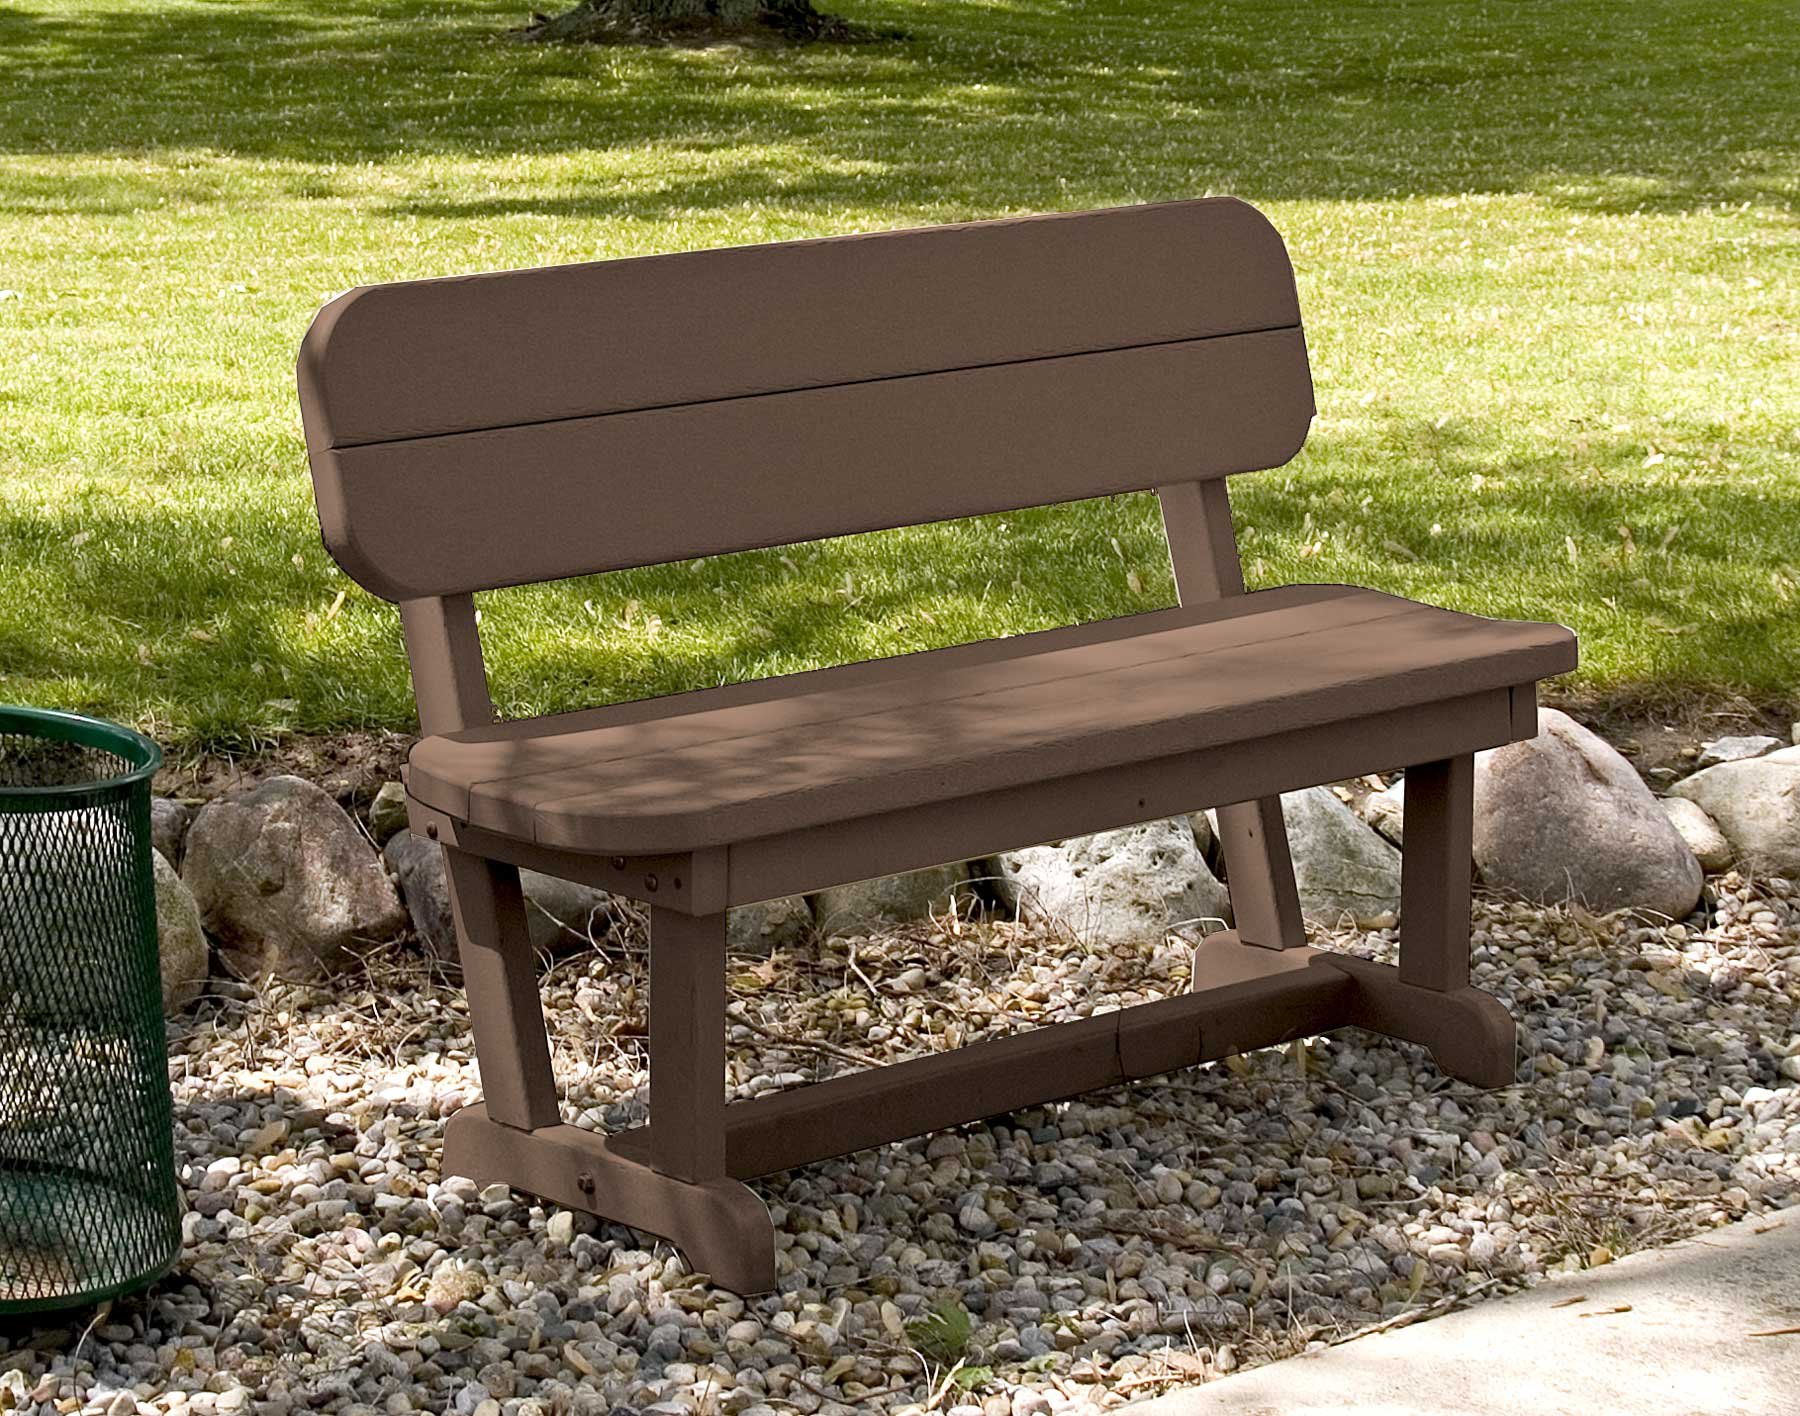 48" Polywood Commercial Bench 